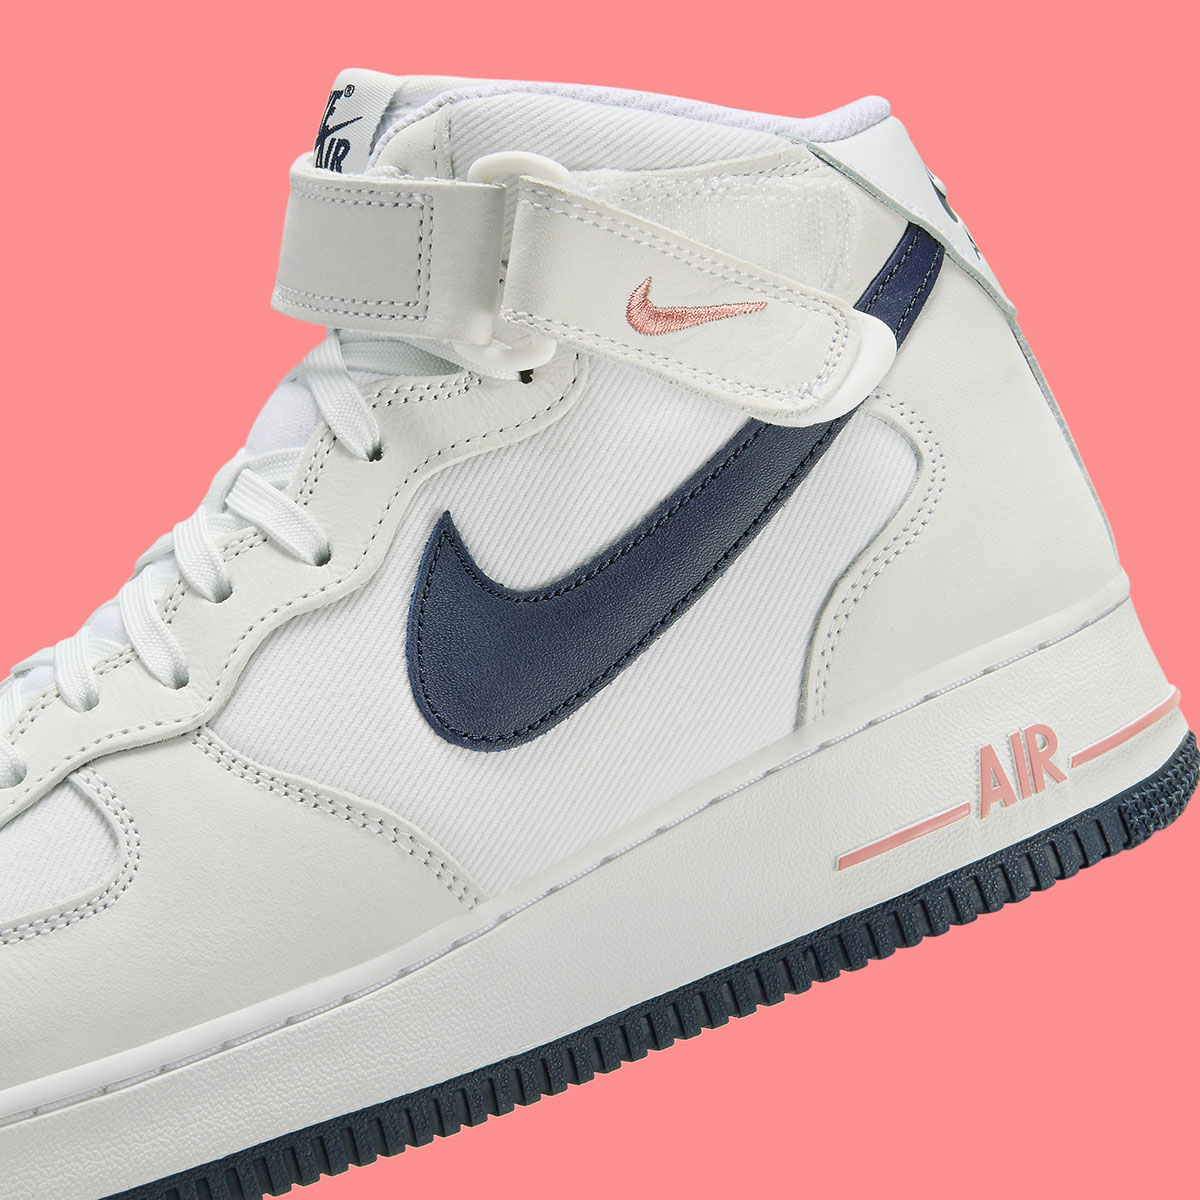 Nike Air Force 1 Mid Summit White Obsidian Pink Fb8879 100 5